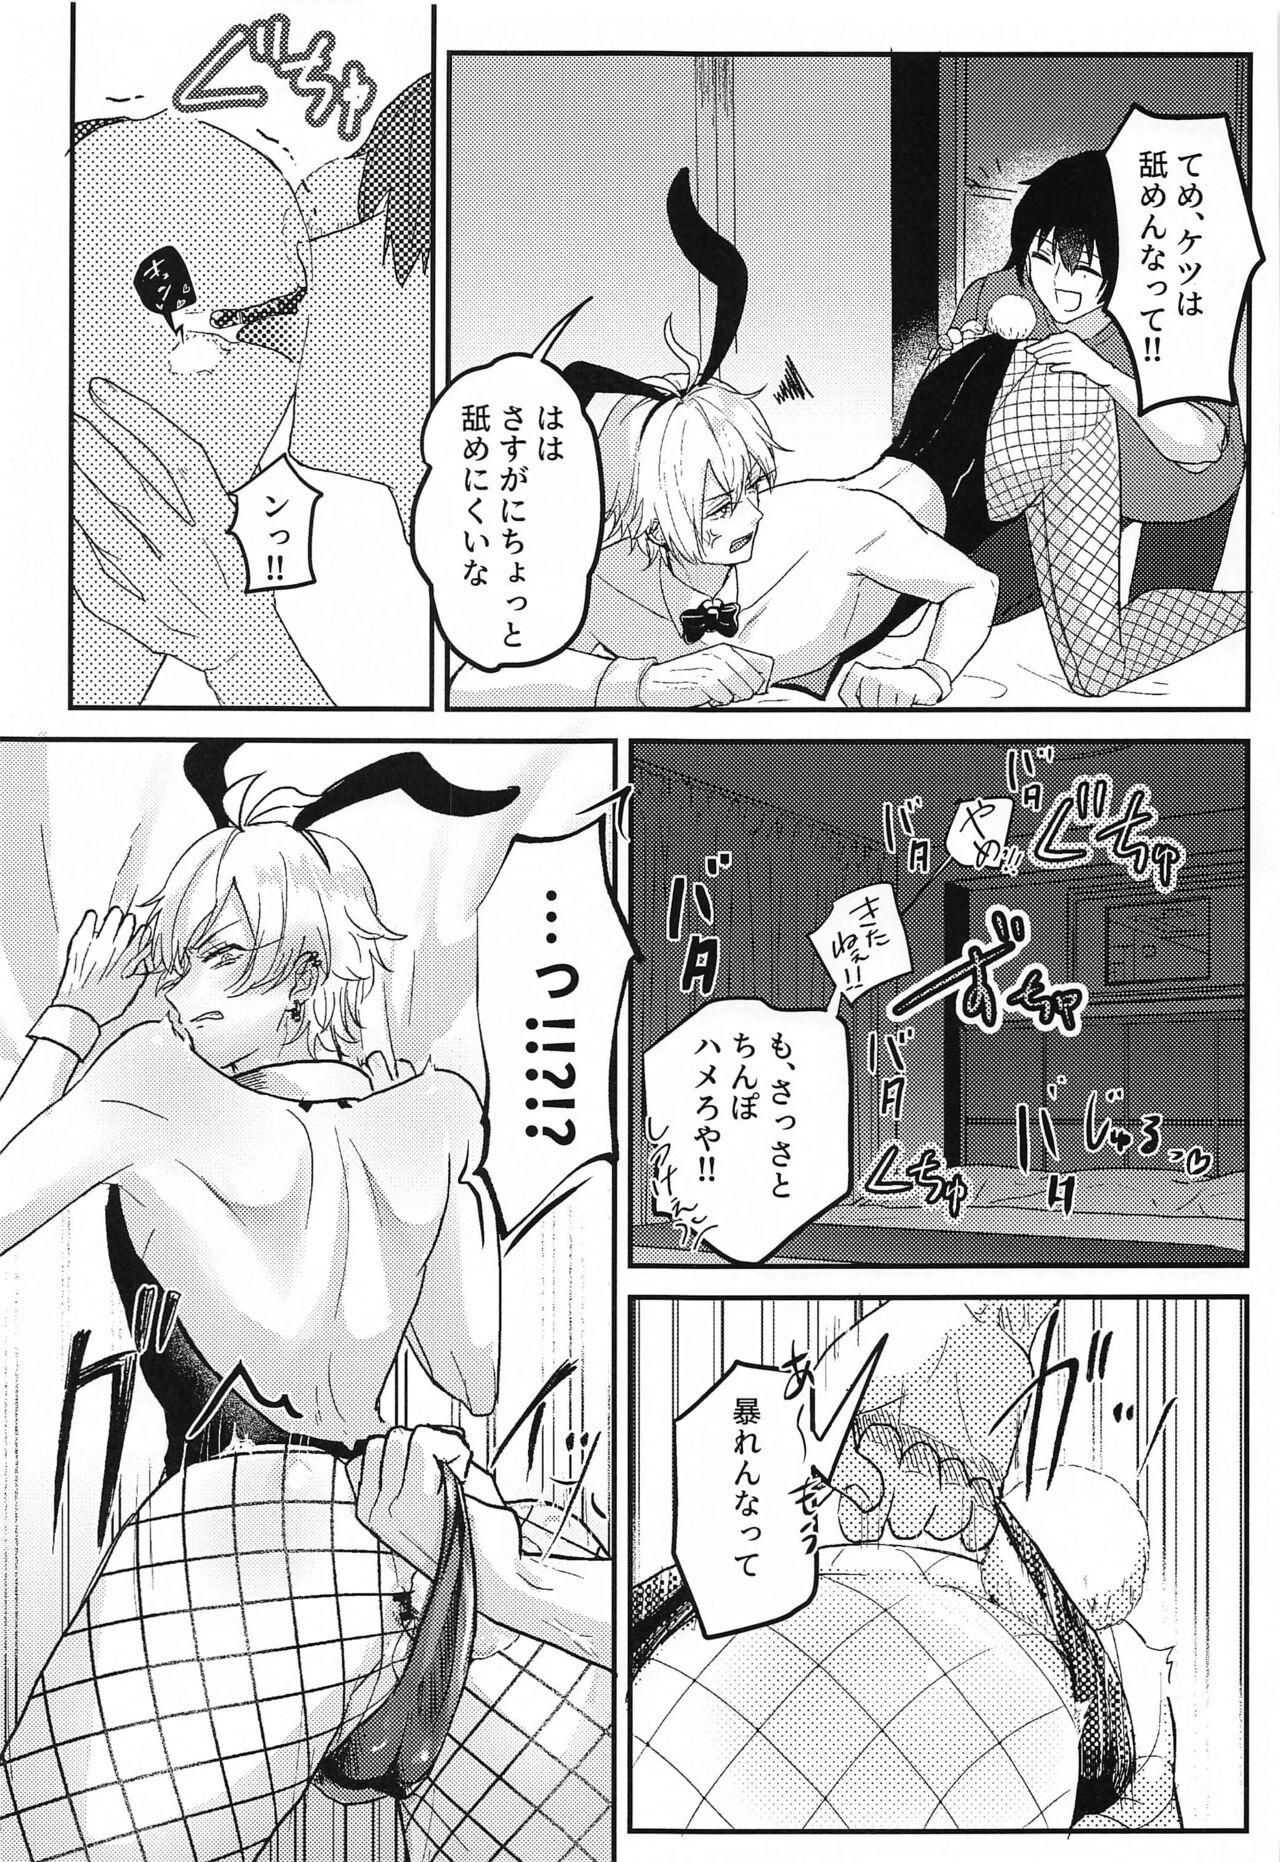 Teensex Bunny - Hypnosis mic Colombia - Page 10